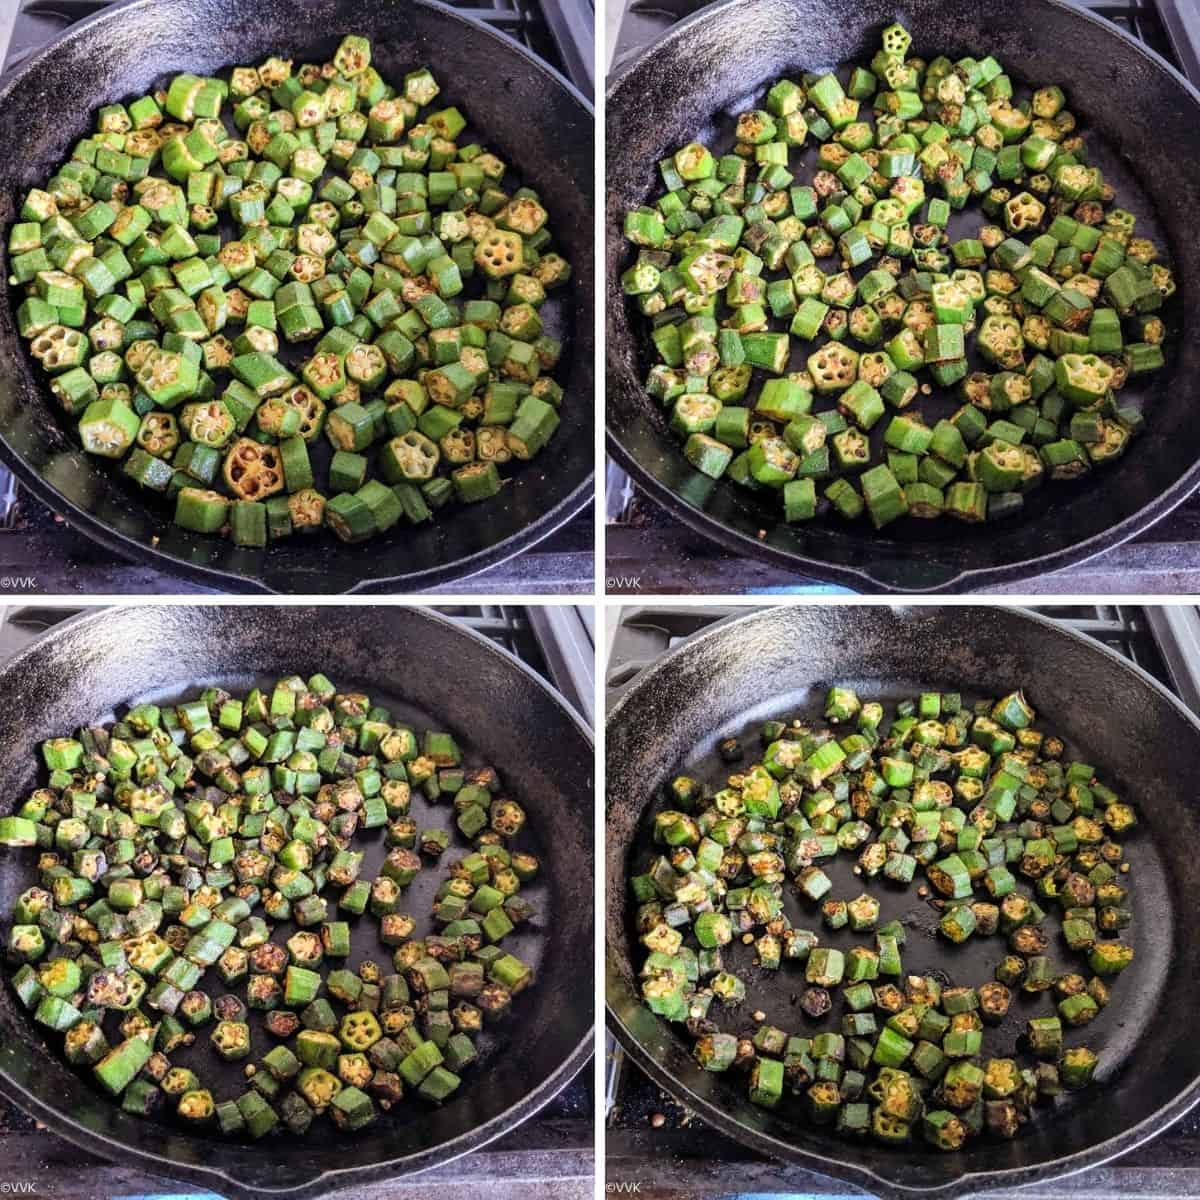 okra cooking at different stages